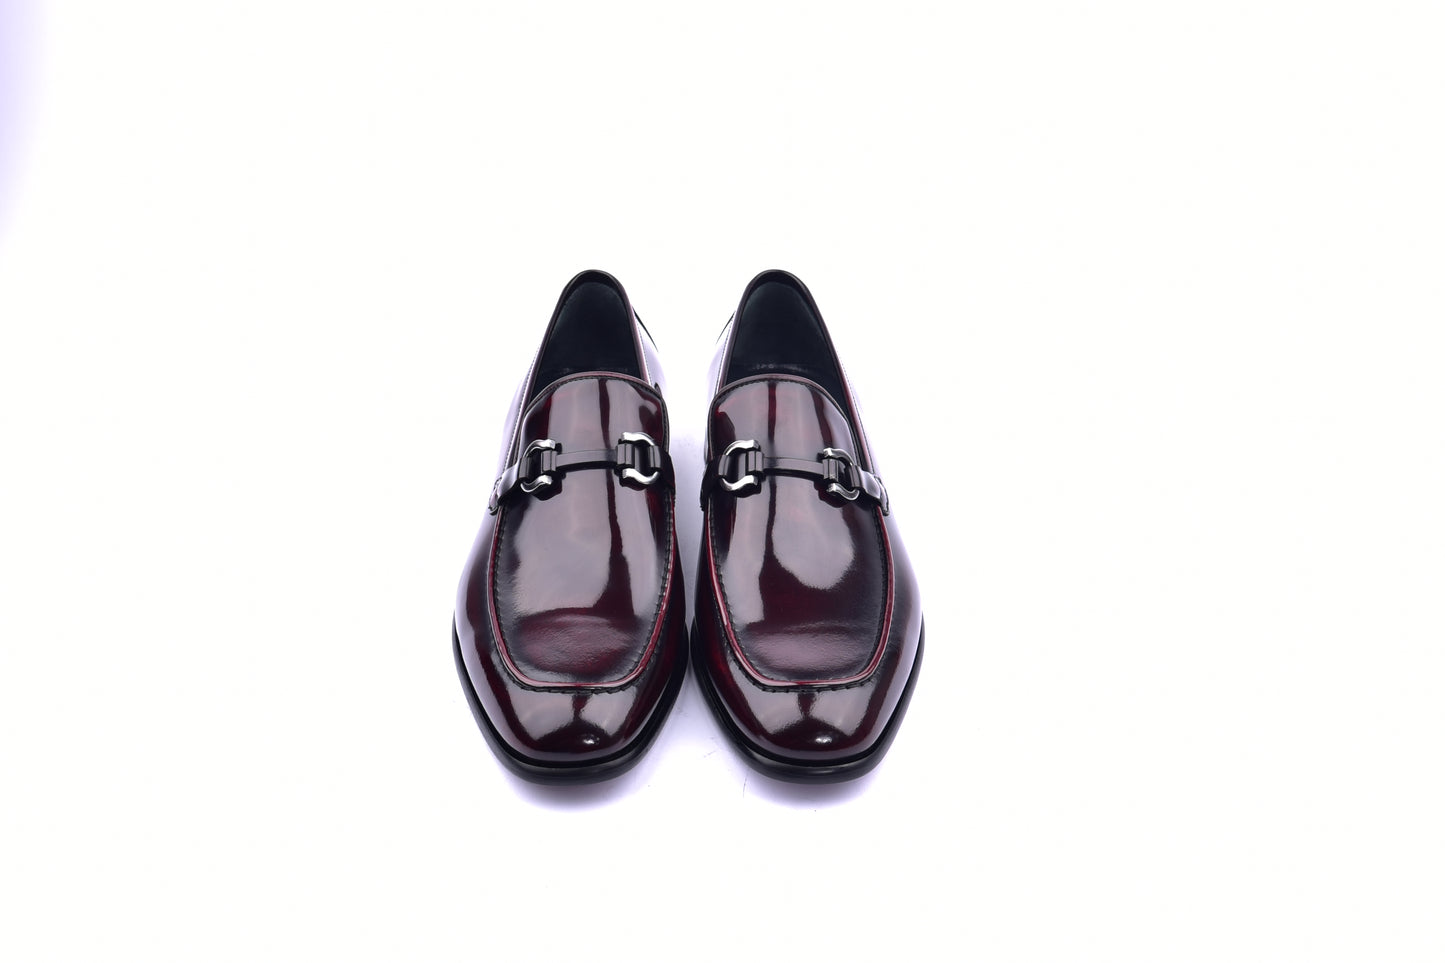 C0431-6415 Lux Calf Buckle Loafer- Burgundy